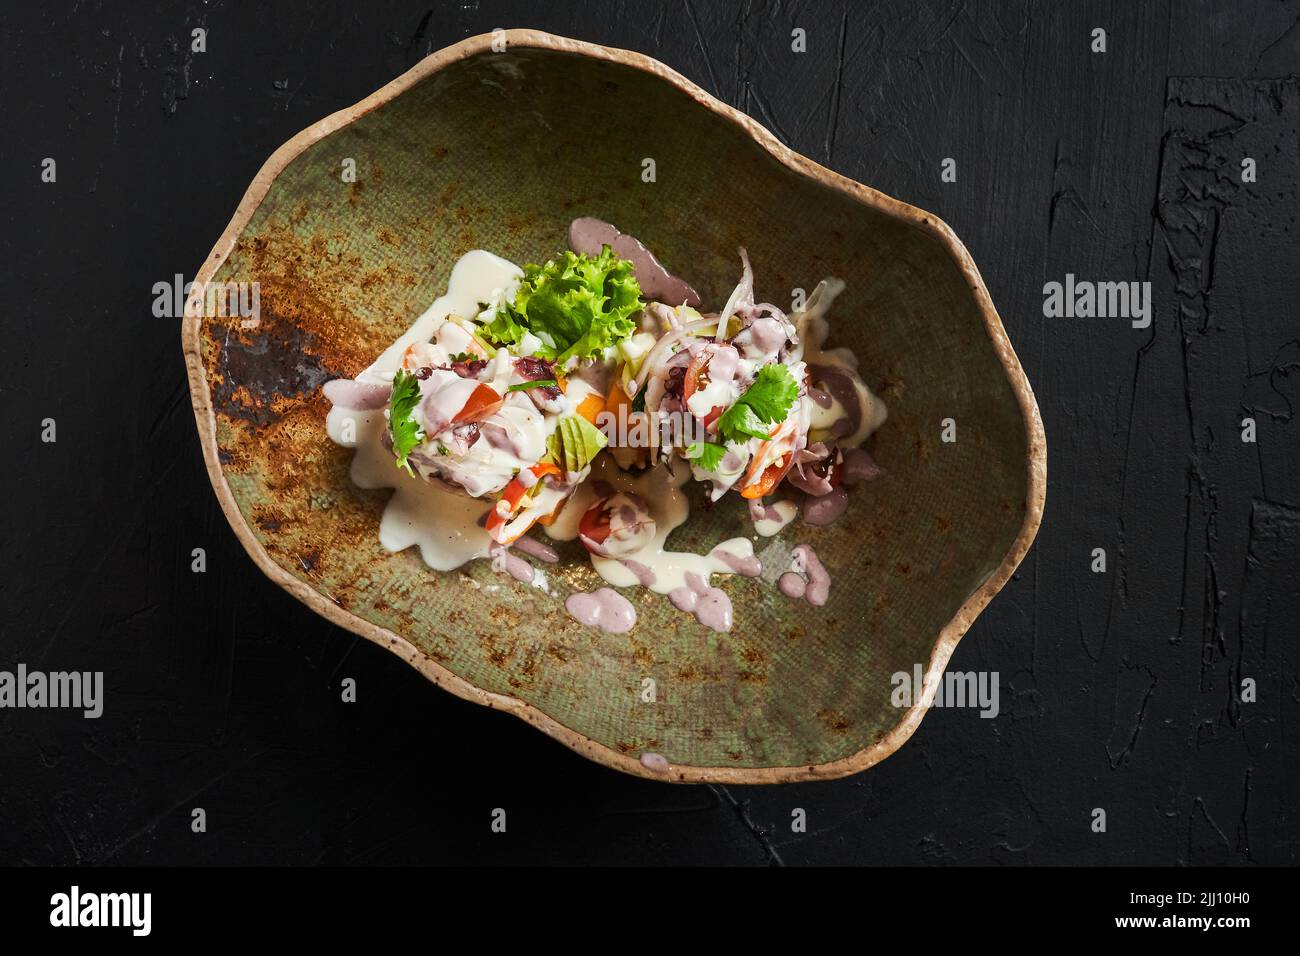 plate with peruvian food on a black background Stock Photo